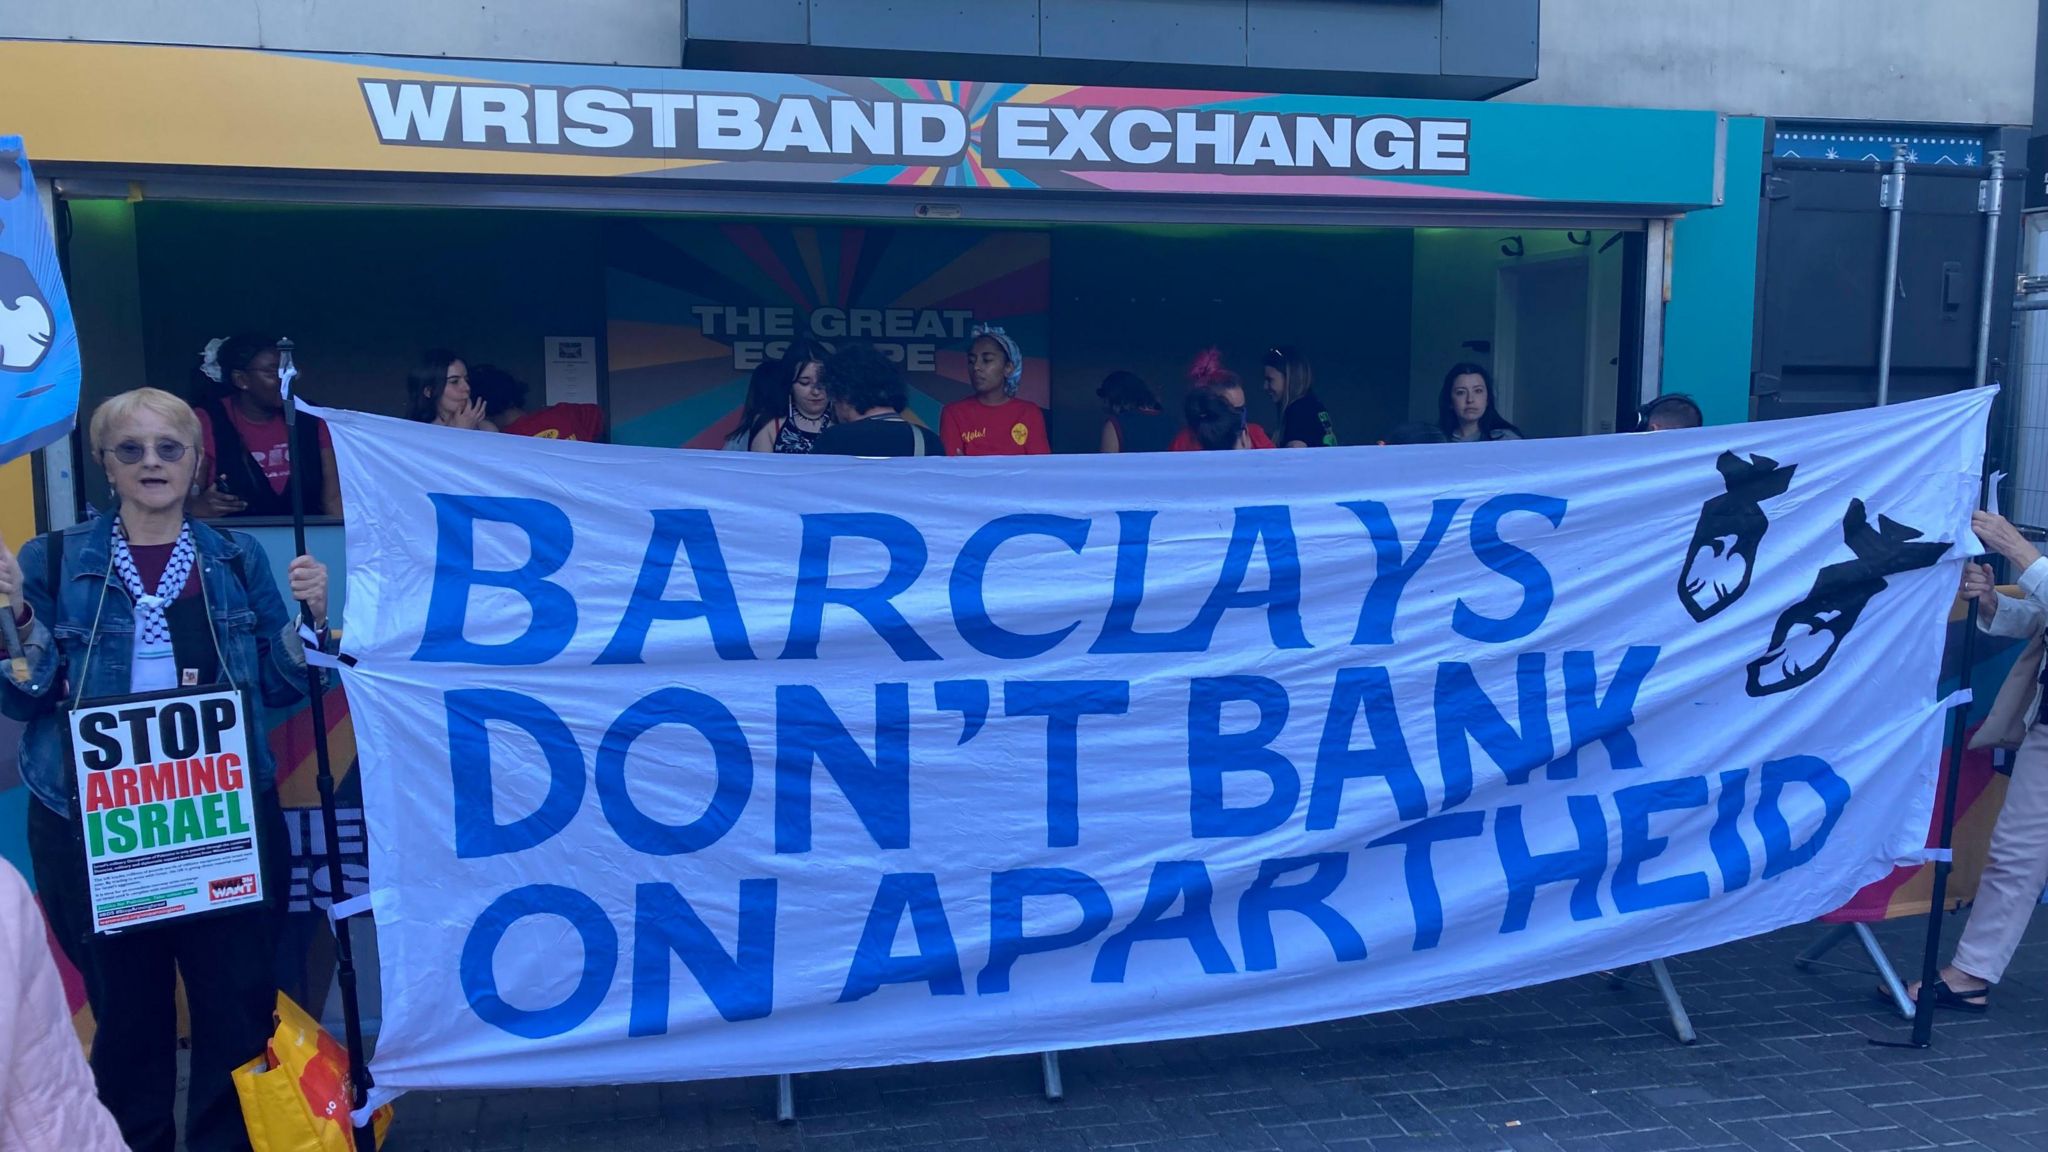 A banner reading "Barclays don't bank on apartheid" being held up outside a festival wristband exchange